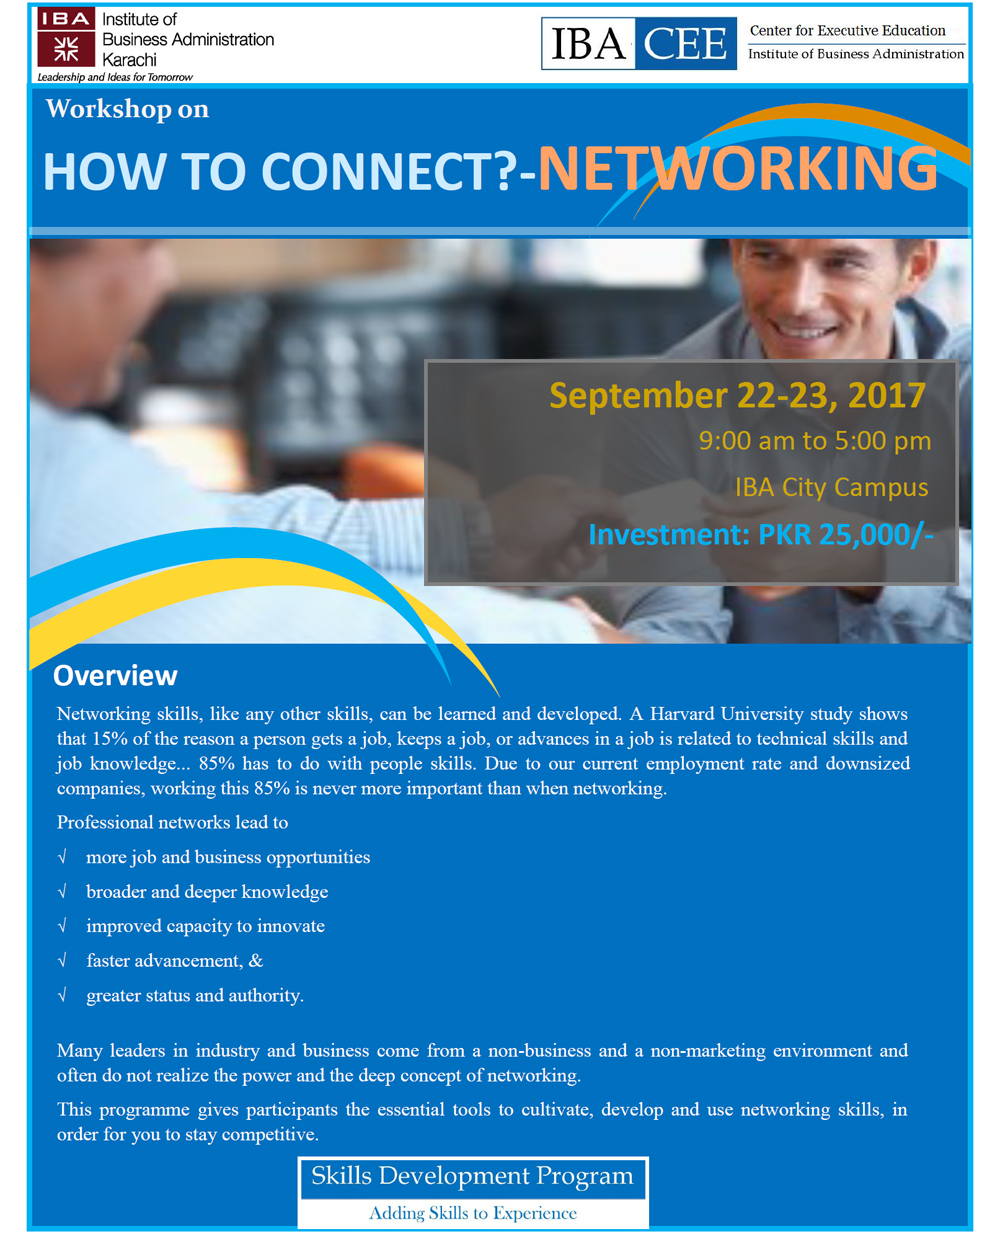 HOW TO CONNECT?-NETWORKING